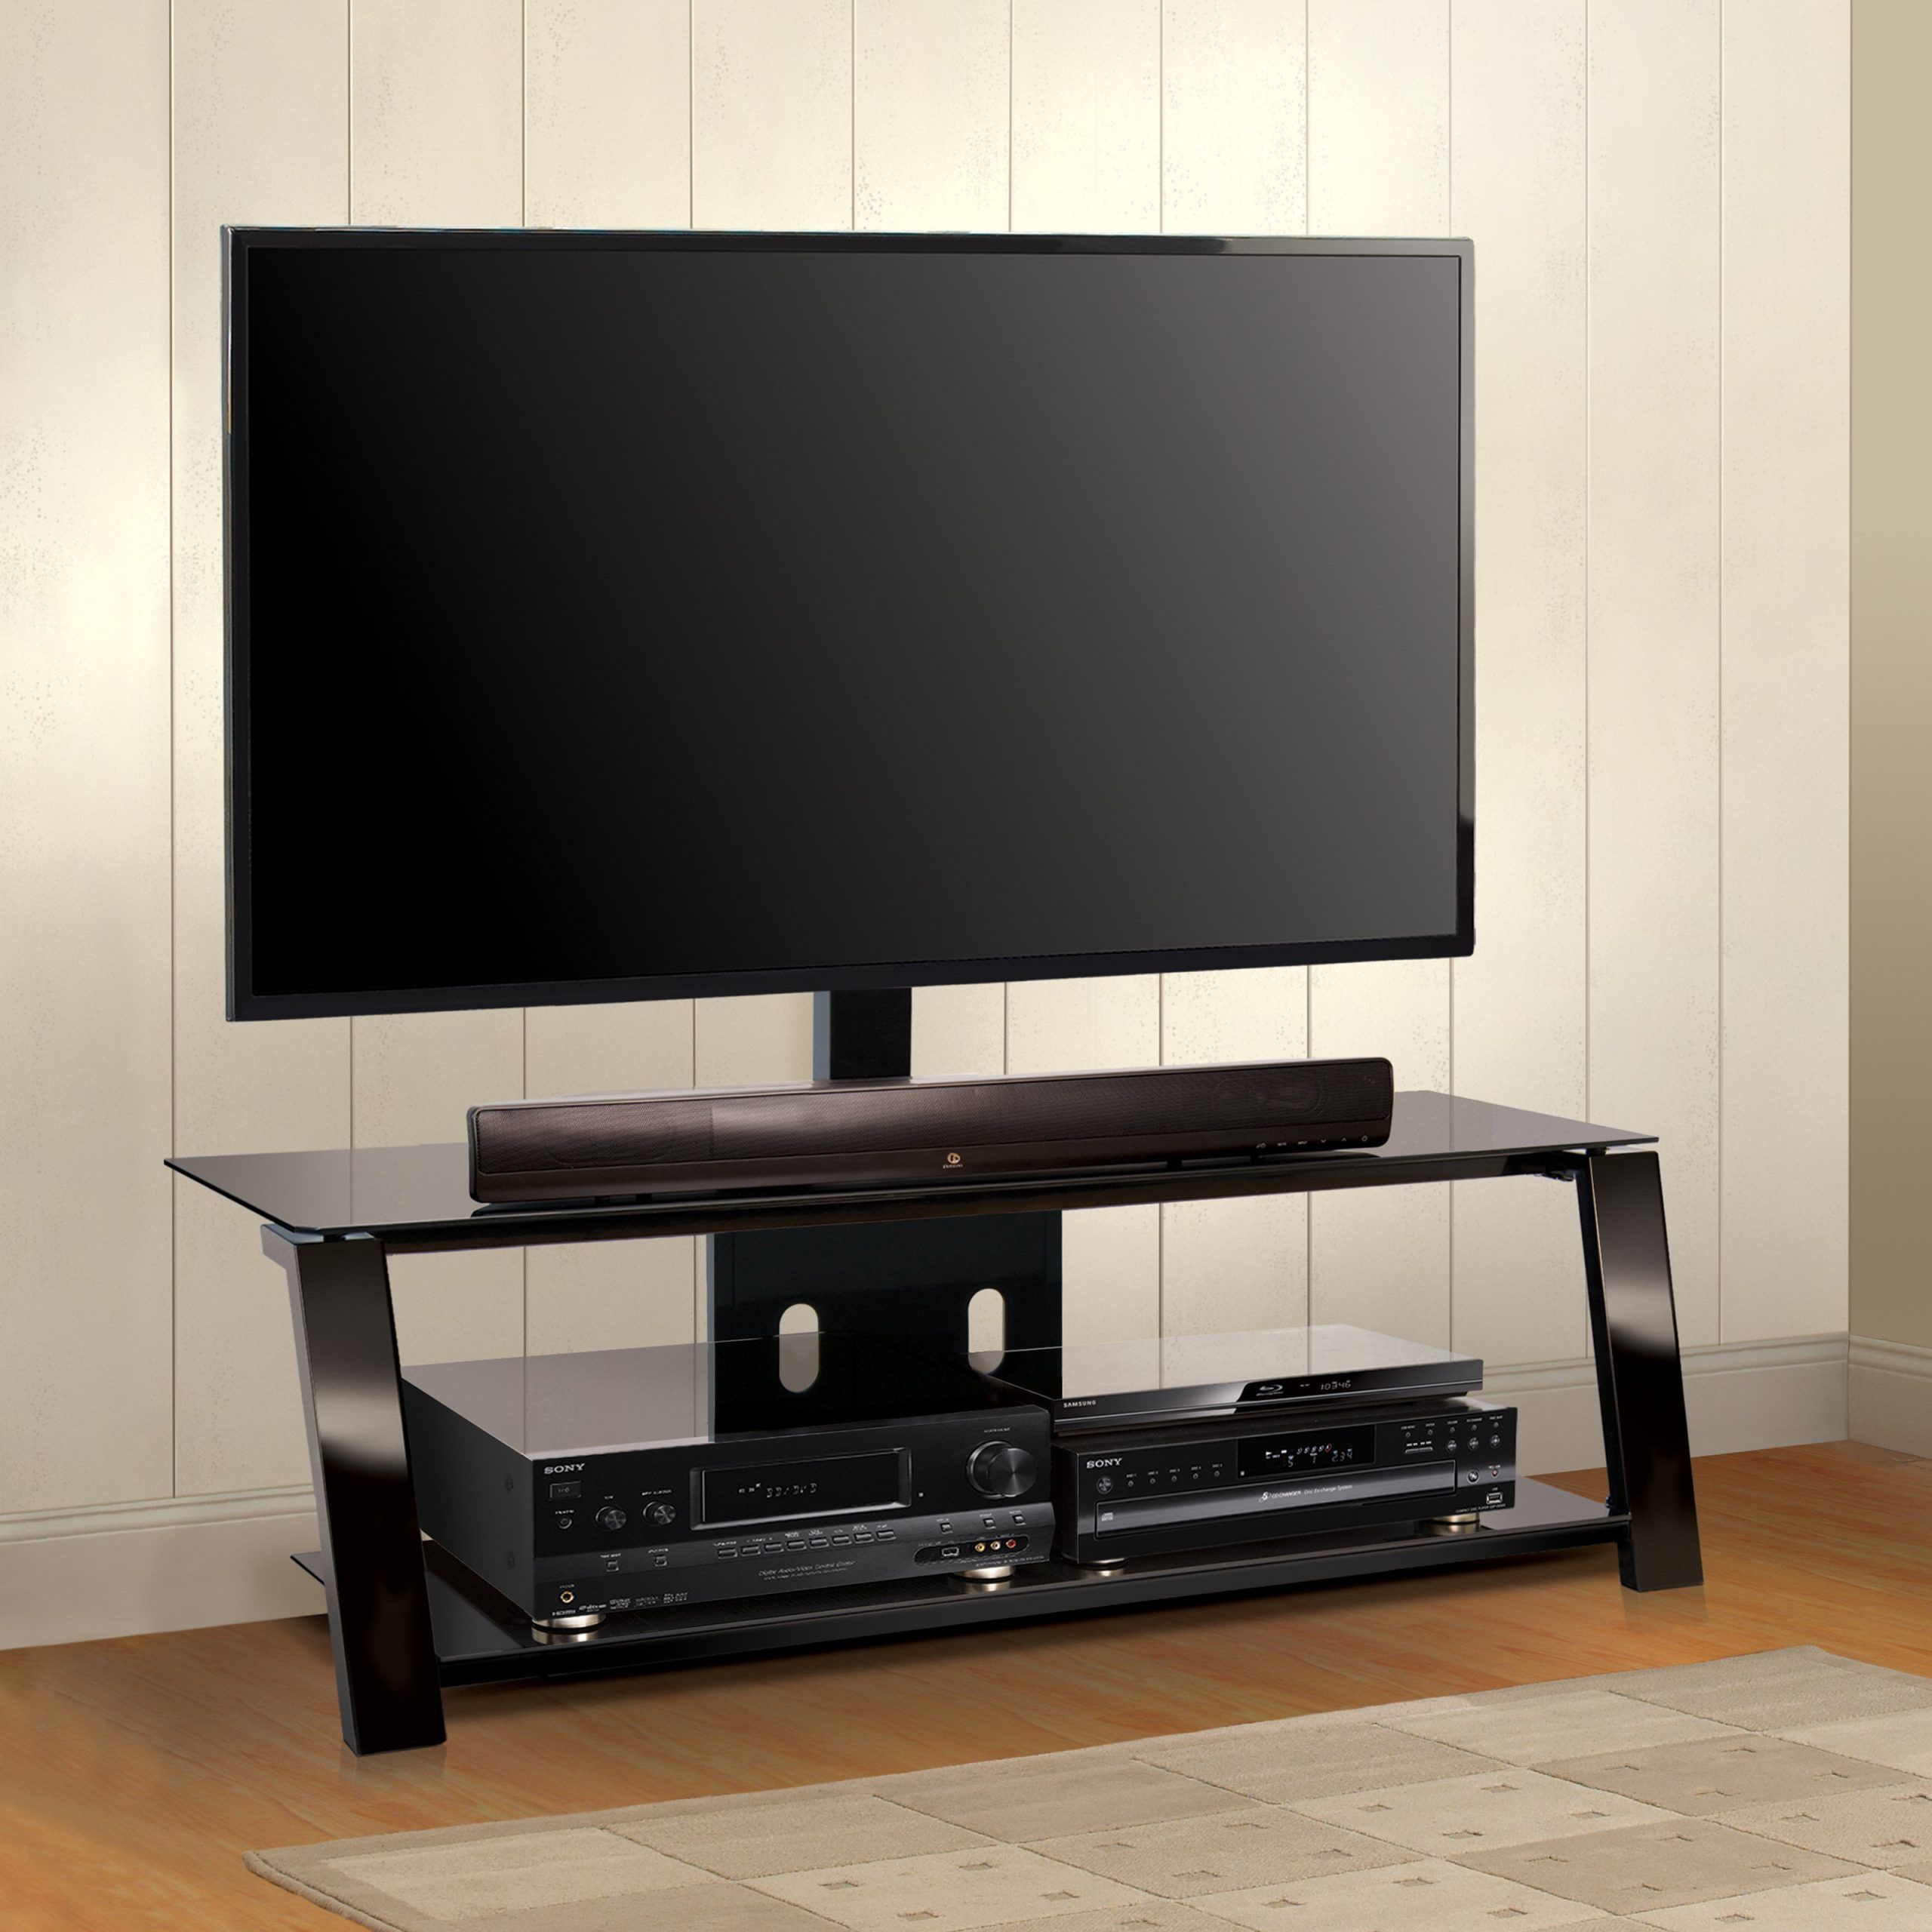 Bello Triple Play 52 In. Universal Flat Panel Tv Stand – Black Throughout Stand For Flat Screen (Gallery 1 of 20)